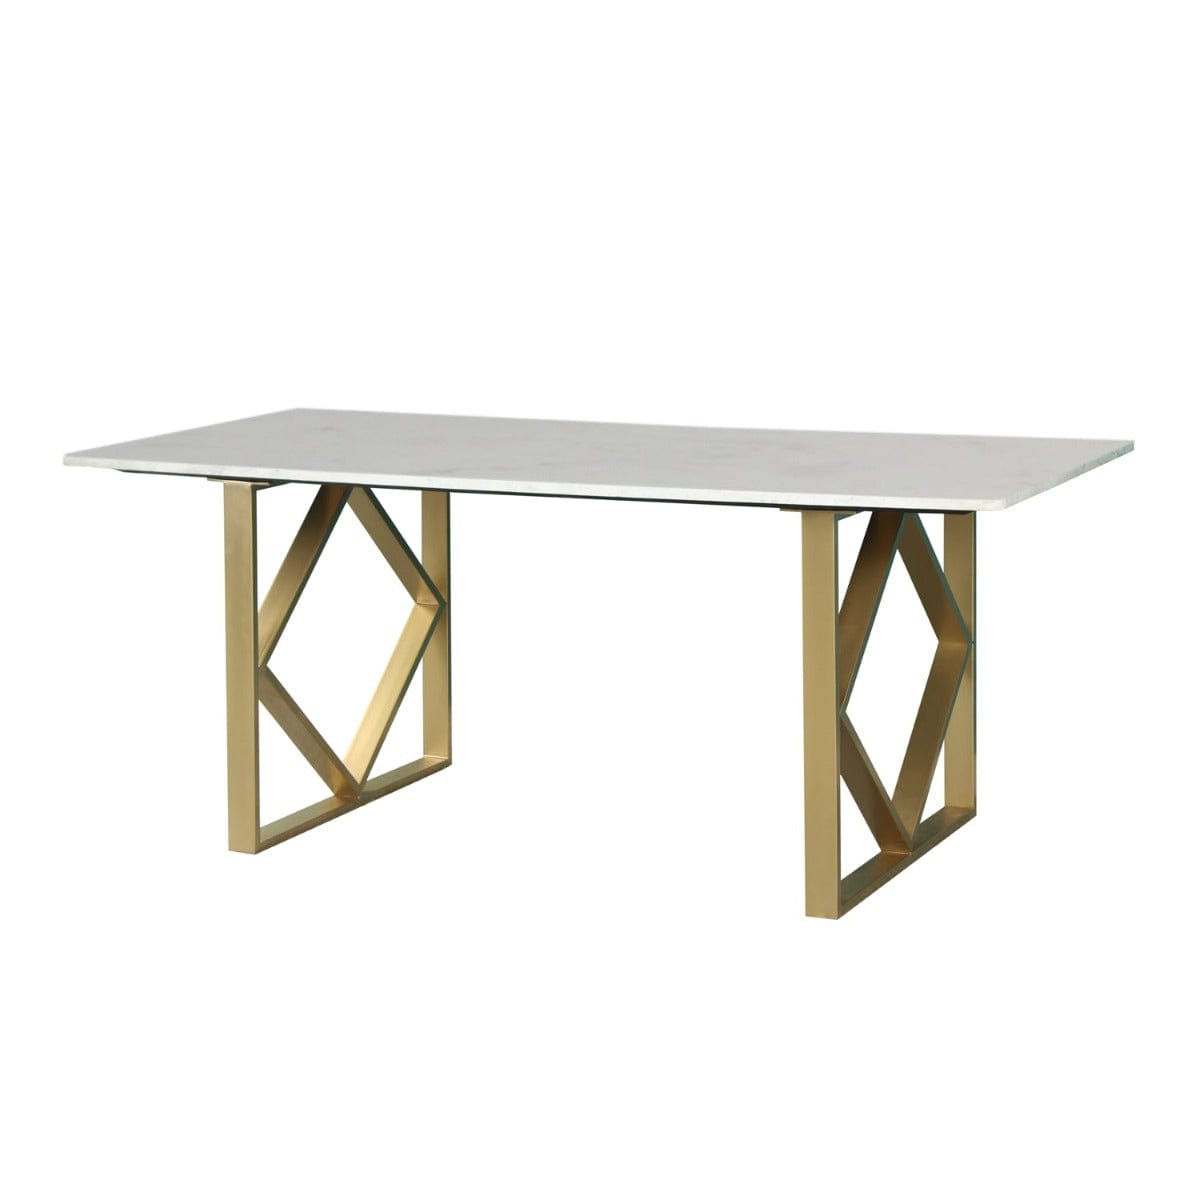 Tabak 6 Seater Marble Dining Table Set In Gold Finish